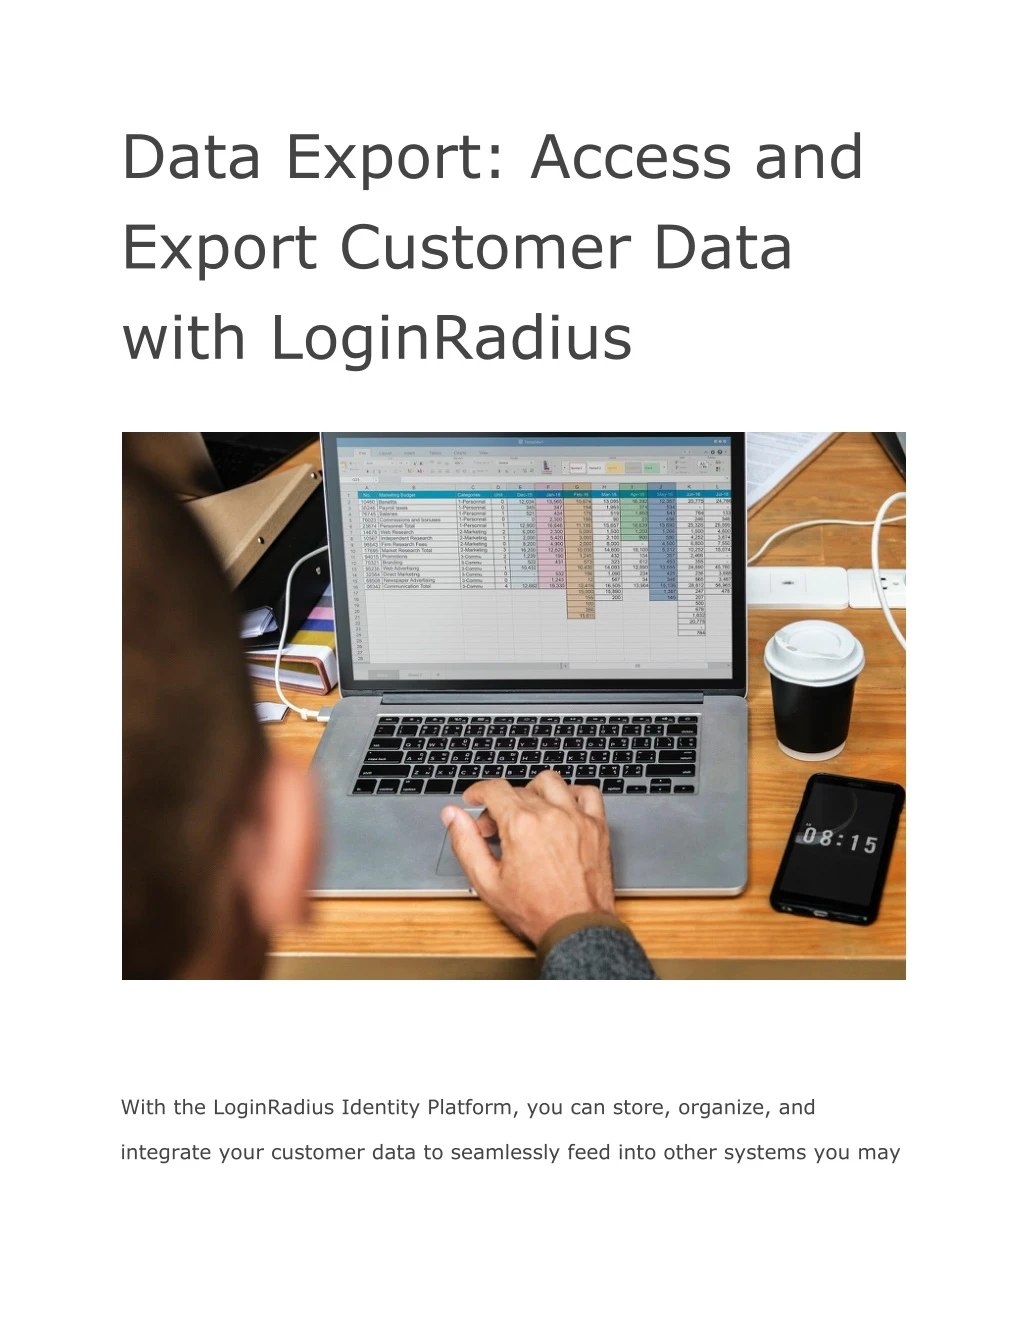 data export access and export customer data with